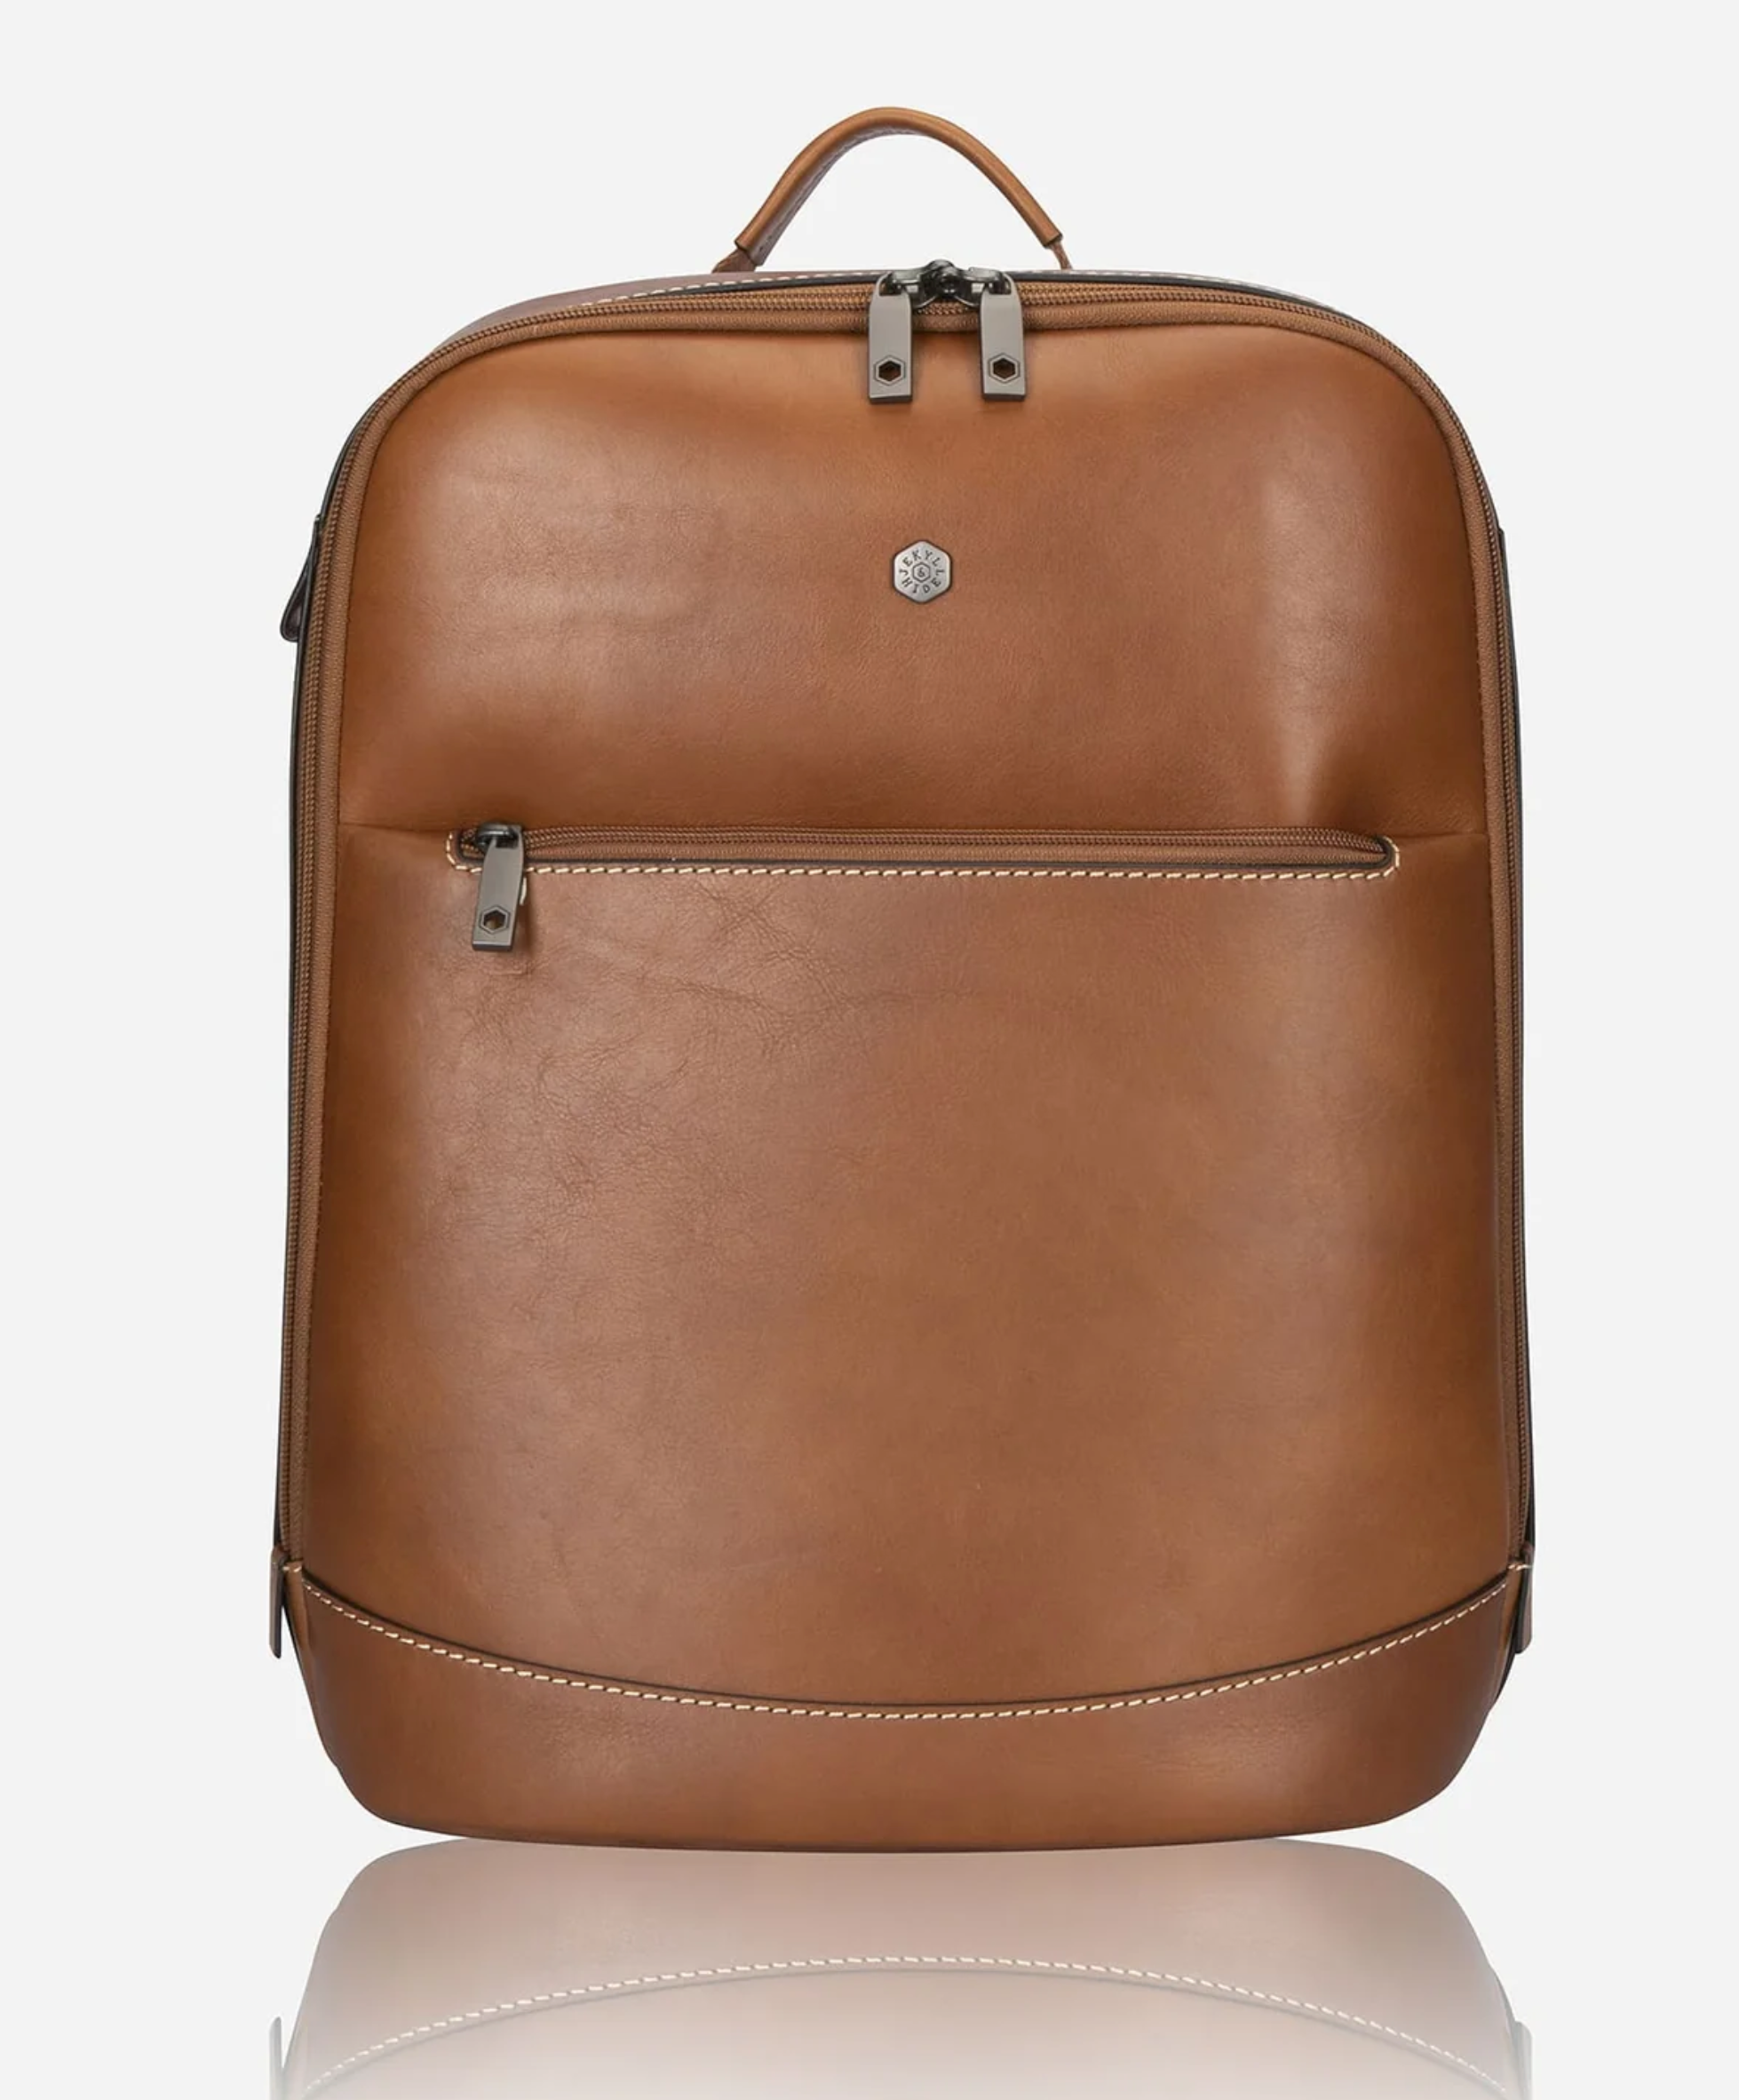 Montana Leather Laptop Backpack-7005MOCLG  https://harrysformenswear.com.au/products/montana-leather-laptop-backpack-7005moclg  With space for all your business essentials and fully recycled PET lining, this men's leather backpack is stylish, functional and considered. Our laptop backpack leather is minimally treated, vegetable tanned and crafted to patina over time, ensuring it develops a look that is uniquely yours.